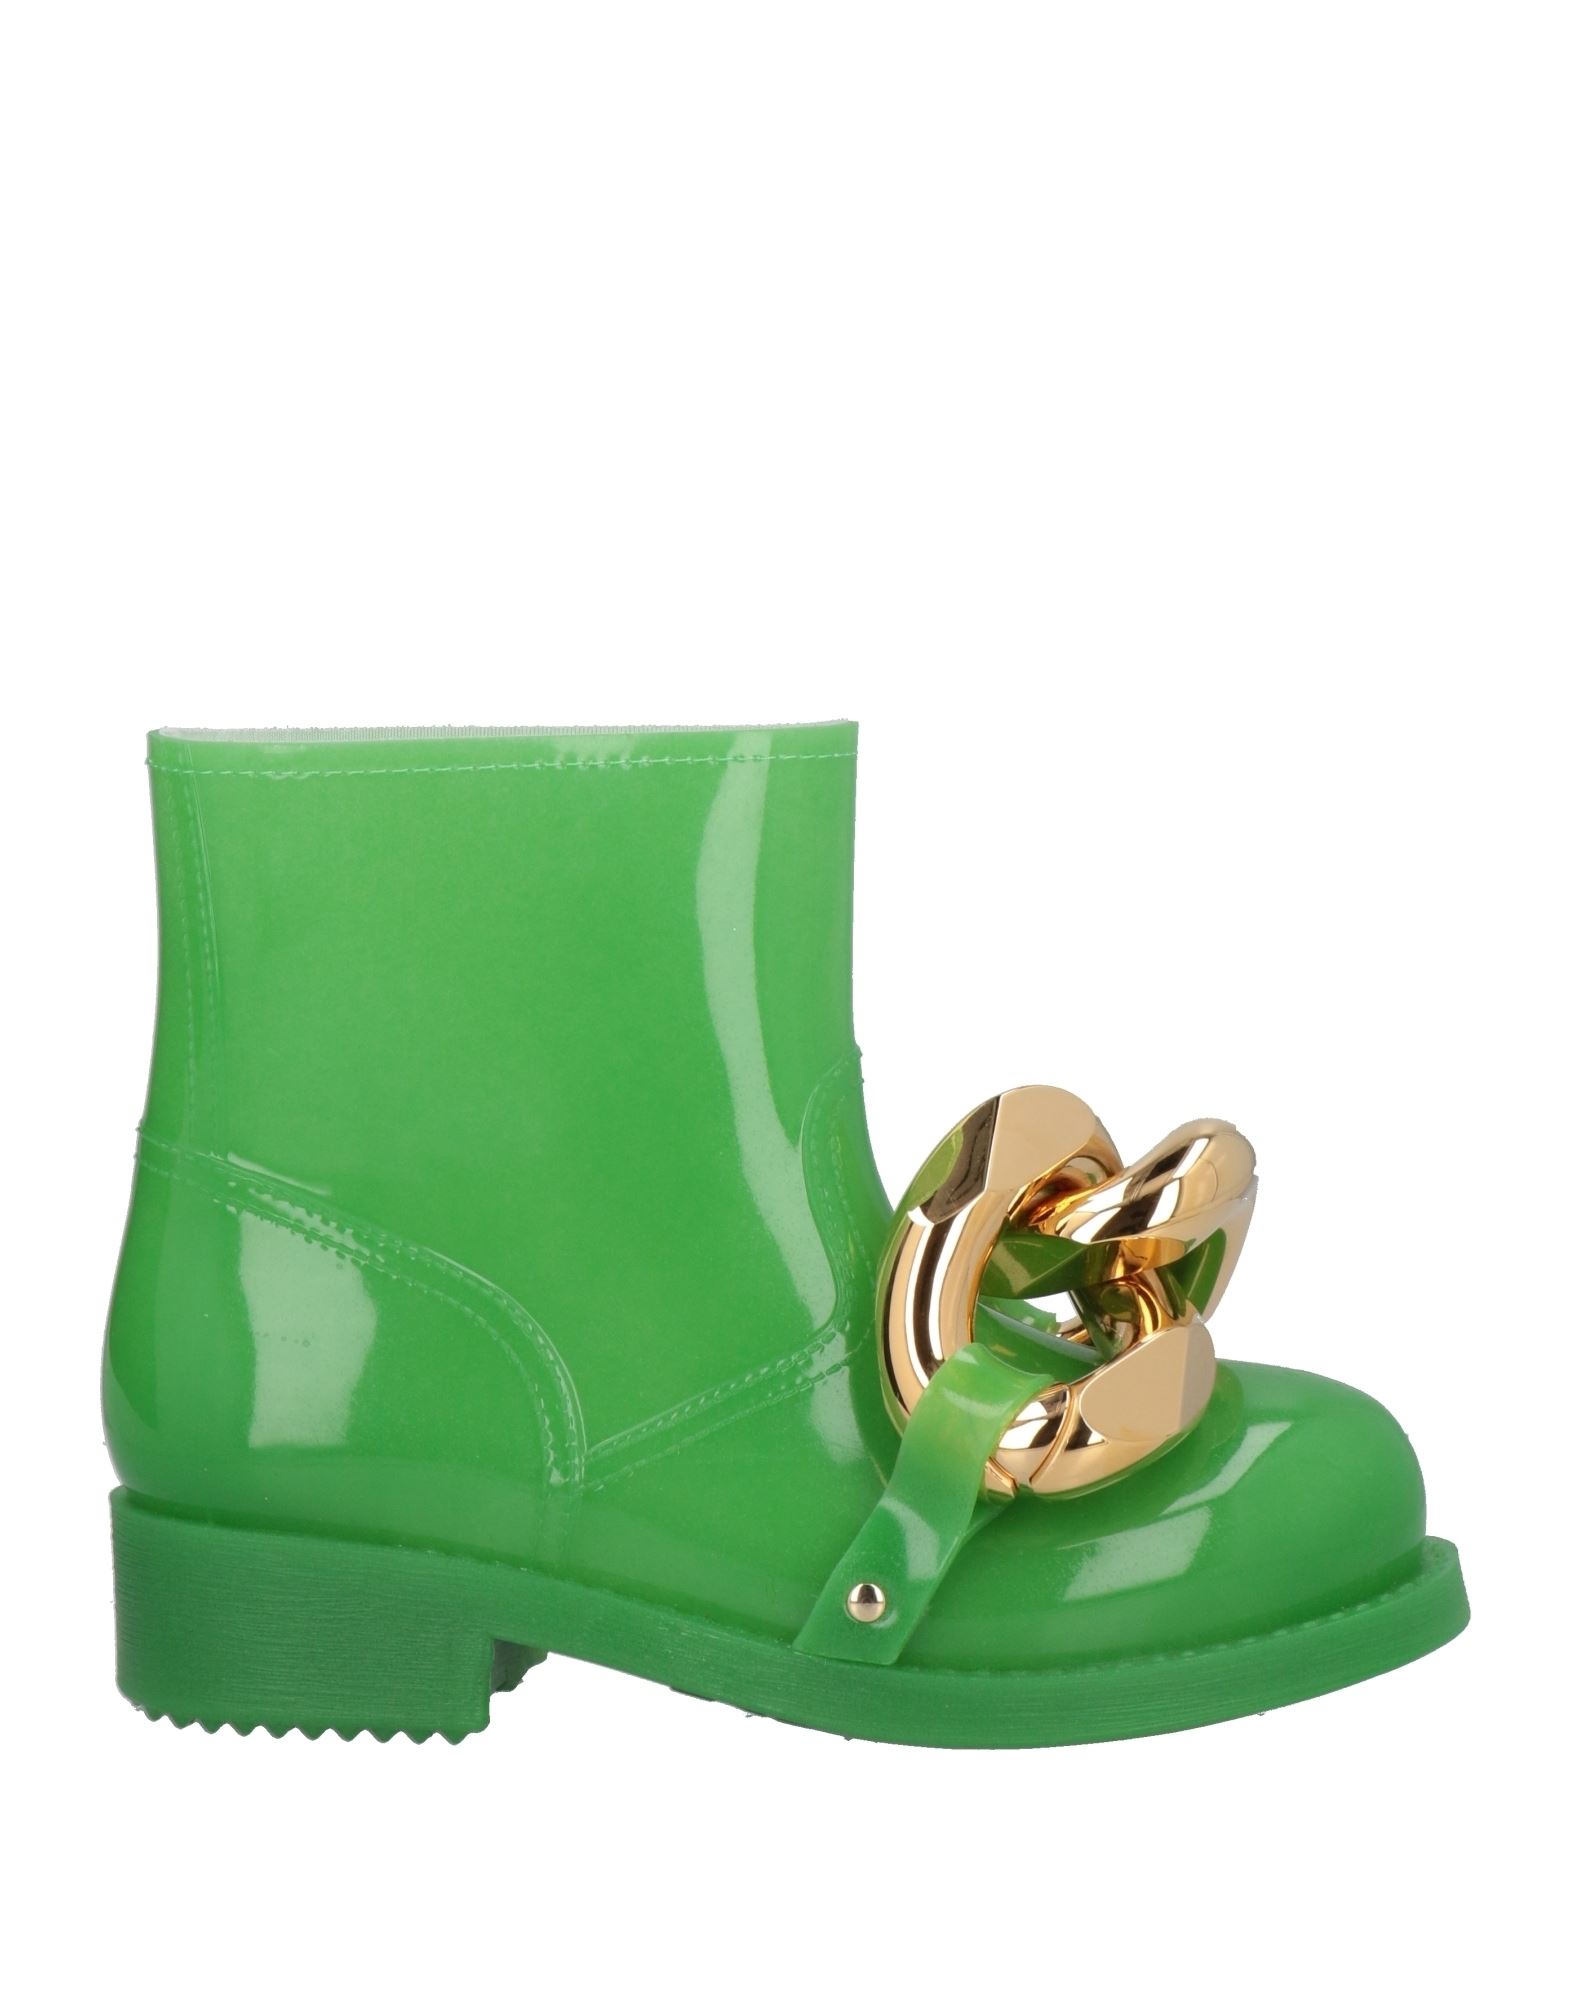 Shop Jw Anderson Woman Ankle Boots Green Size 7 Rubber